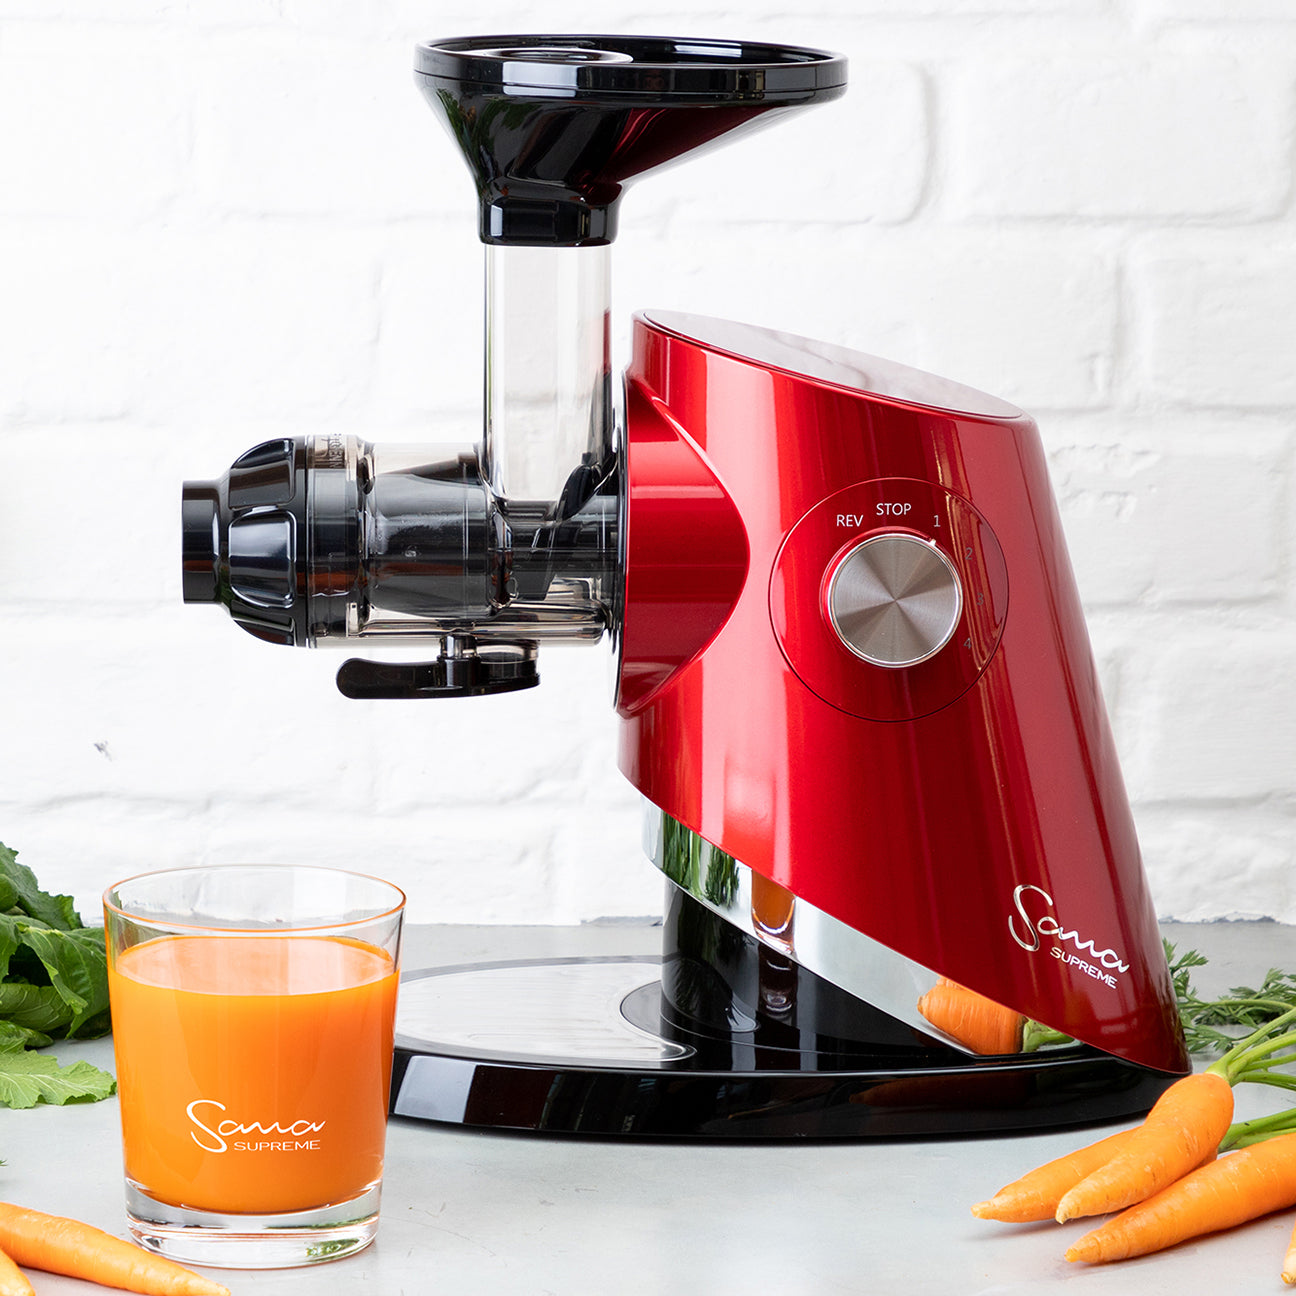 Sana 727 Supreme Cold Press Masticating Juicer and Oil/Press Extractor